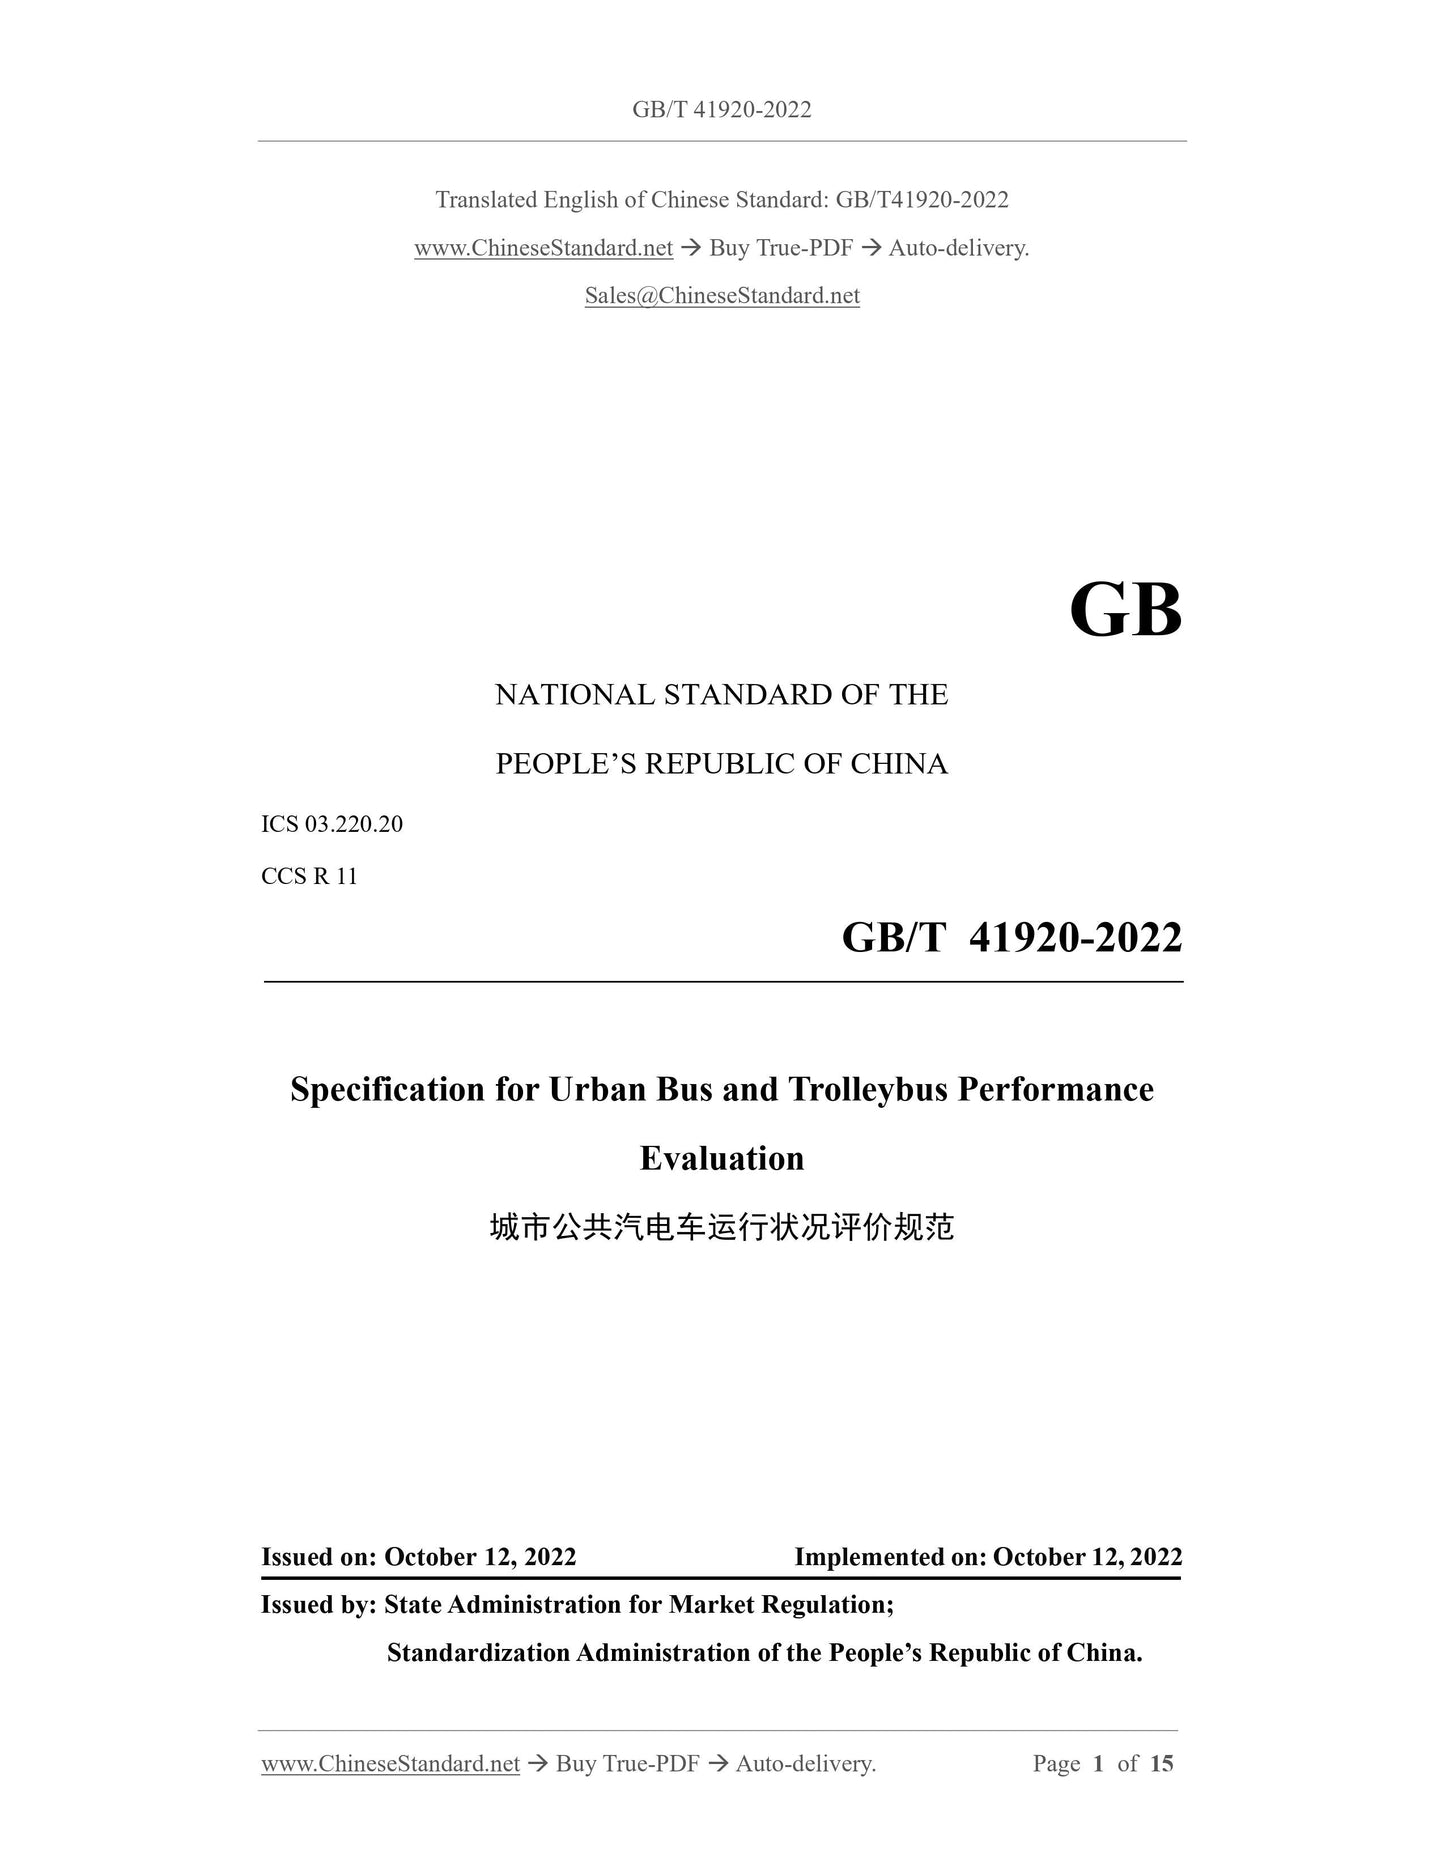 GB/T 41920-2022 Page 1